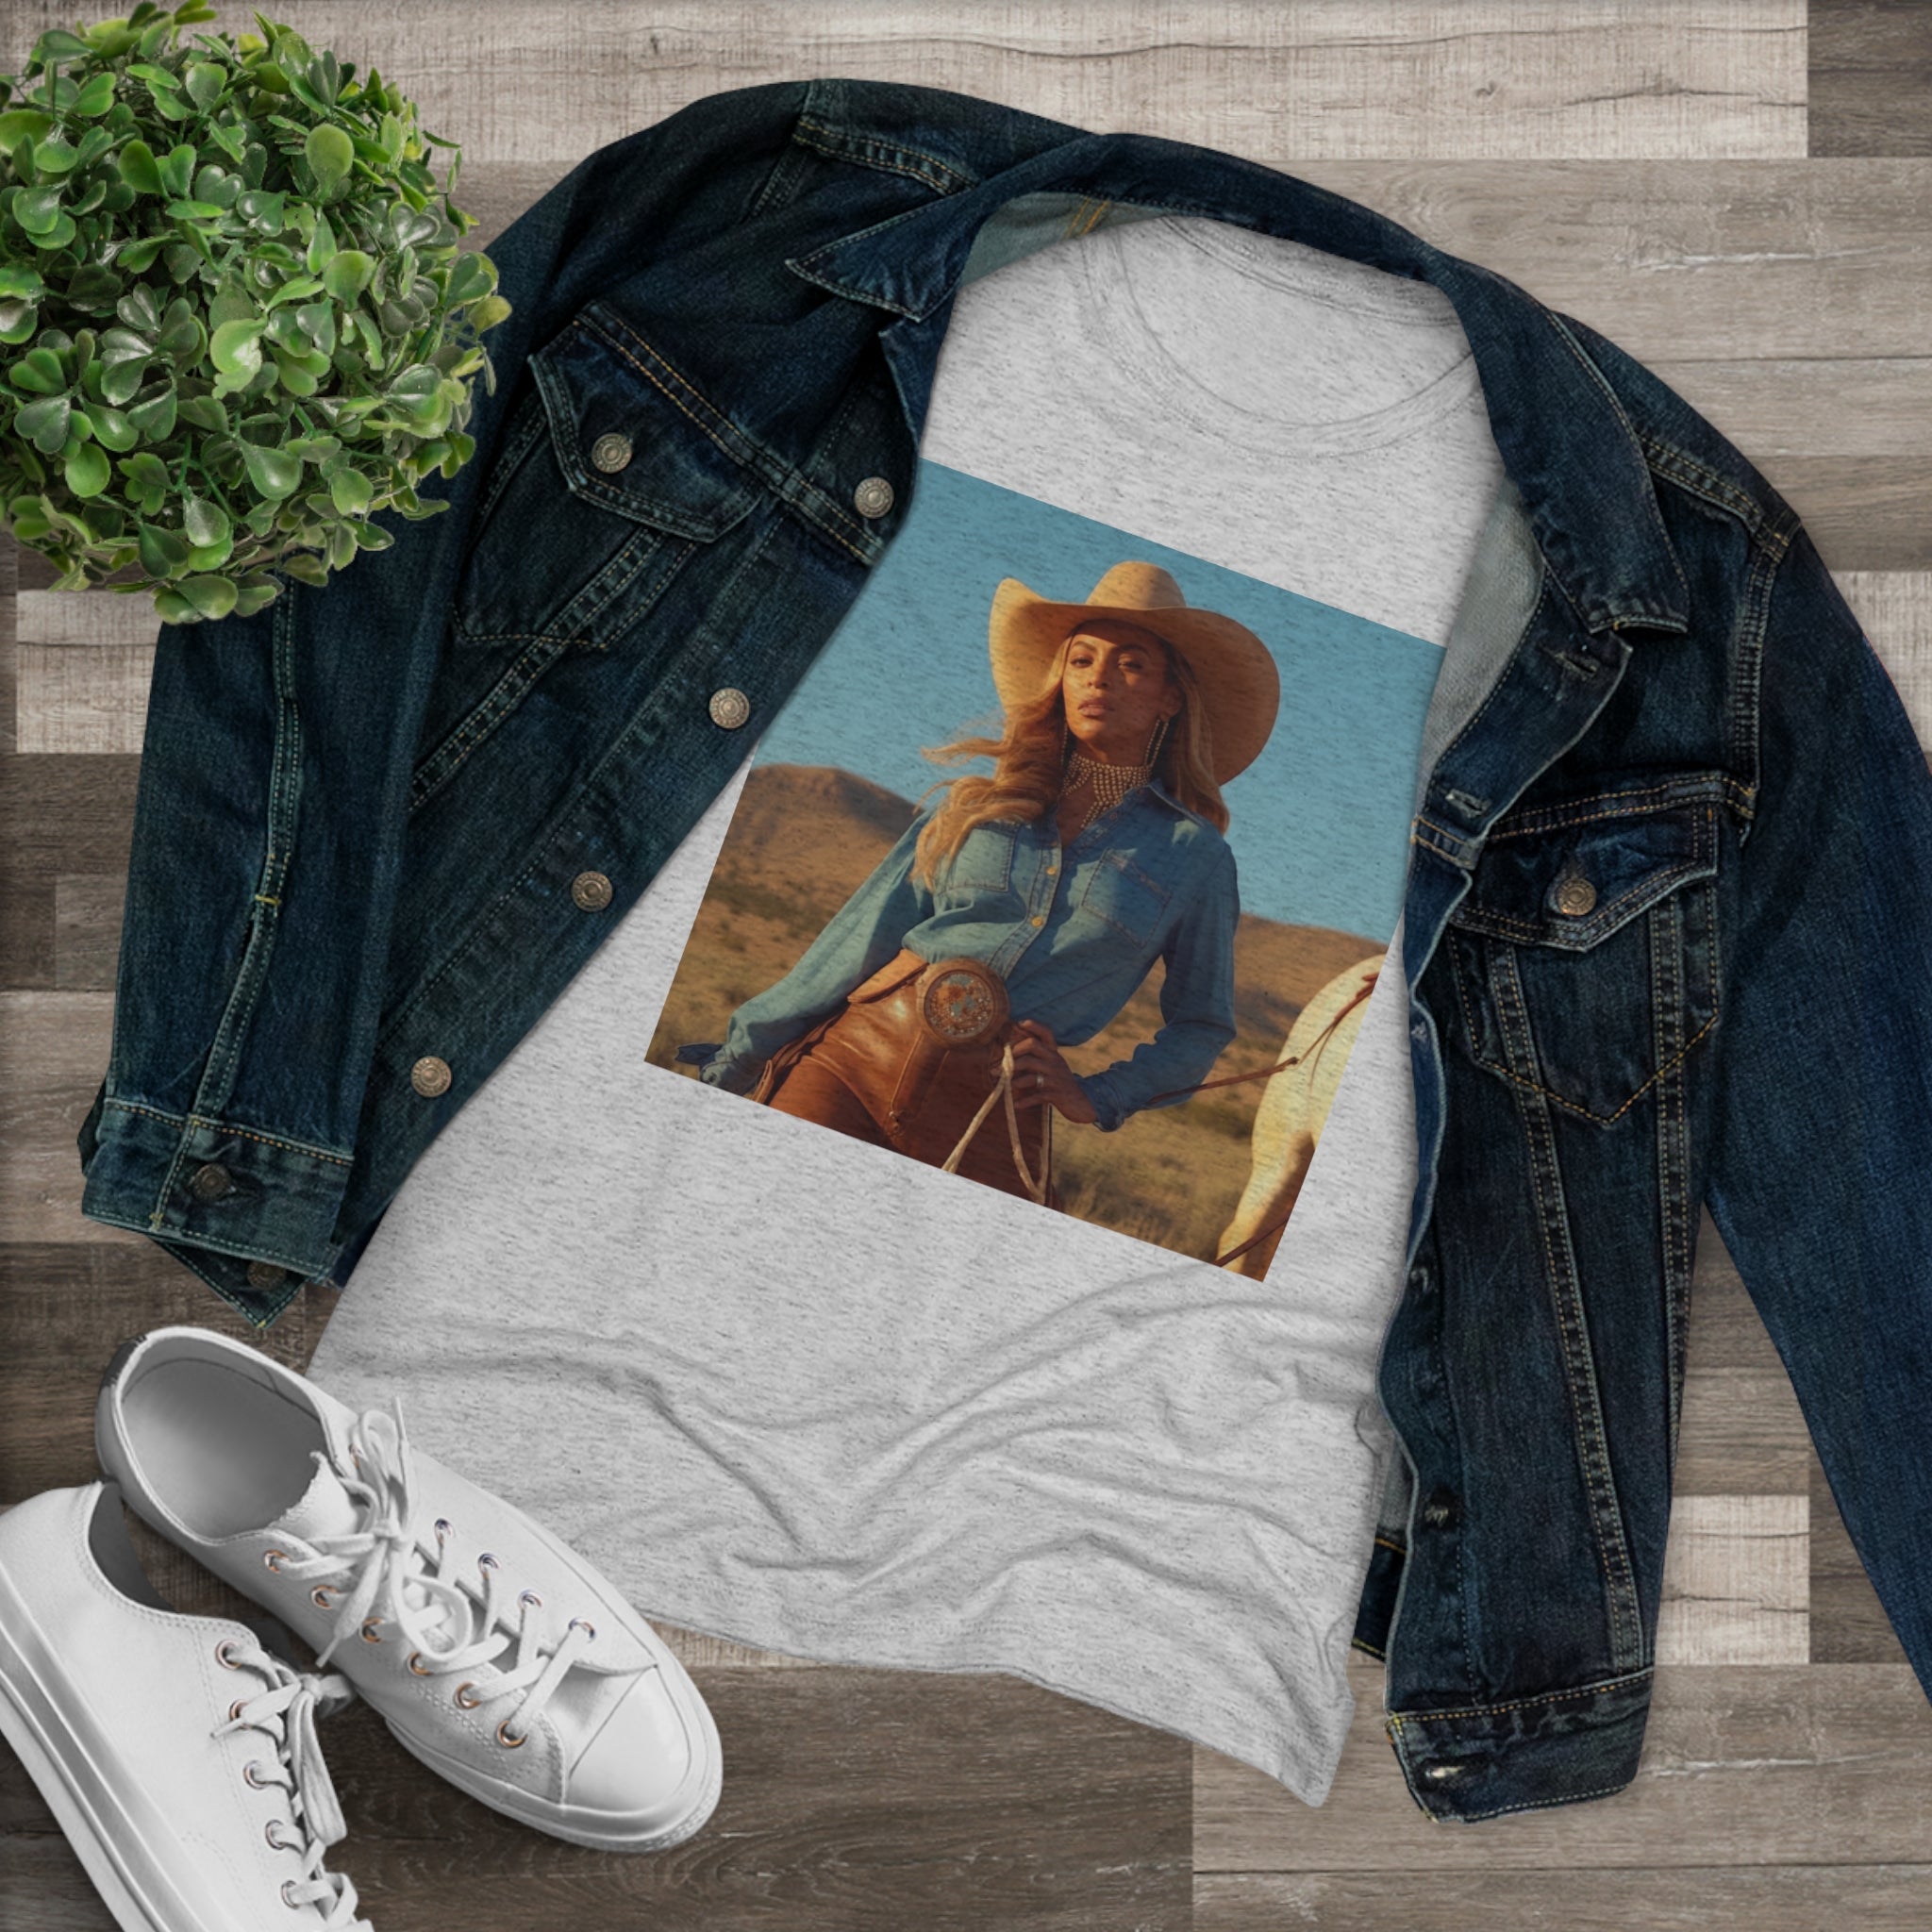 This image features a stylish women's tri-blend tee with a unique design inspired by Beyoncé’s influence on country music. The tee showcases a soft, comfortable fabric in a flattering fit, adorned with artwork that celebrates the crossover charm of country and pop music by the beloved music icon.